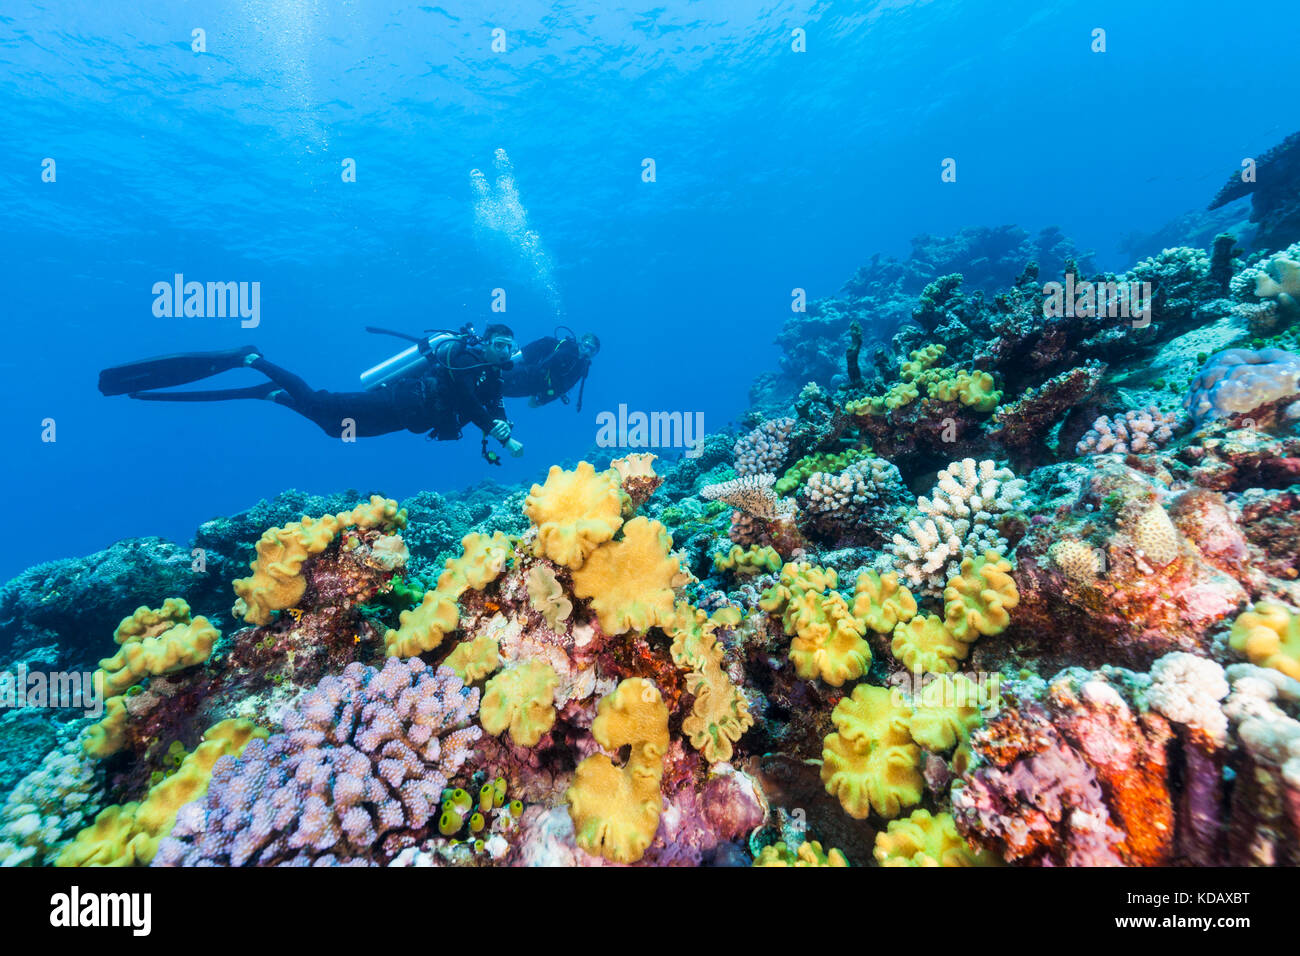 Divers exploring the coral formations of St Crispin Reef, Great Barrier Reef Marine Park, Port Douglas, Queensland, Australia Stock Photo